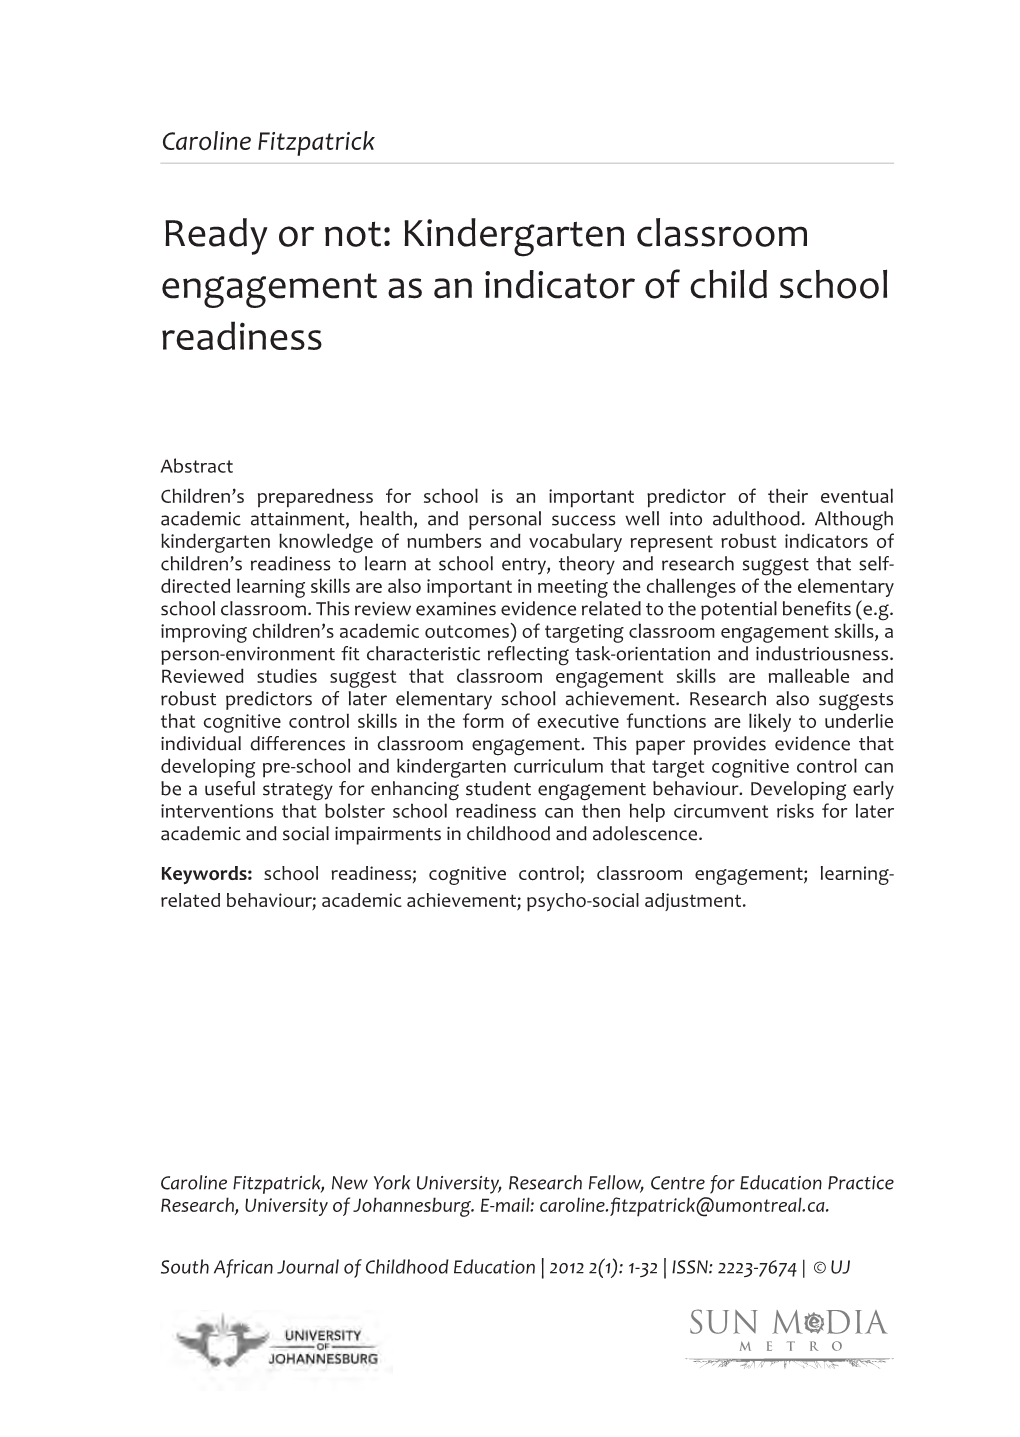 Ready Or Not: Kindergarten Classroom Engagement As an Indicator of Child School Readiness